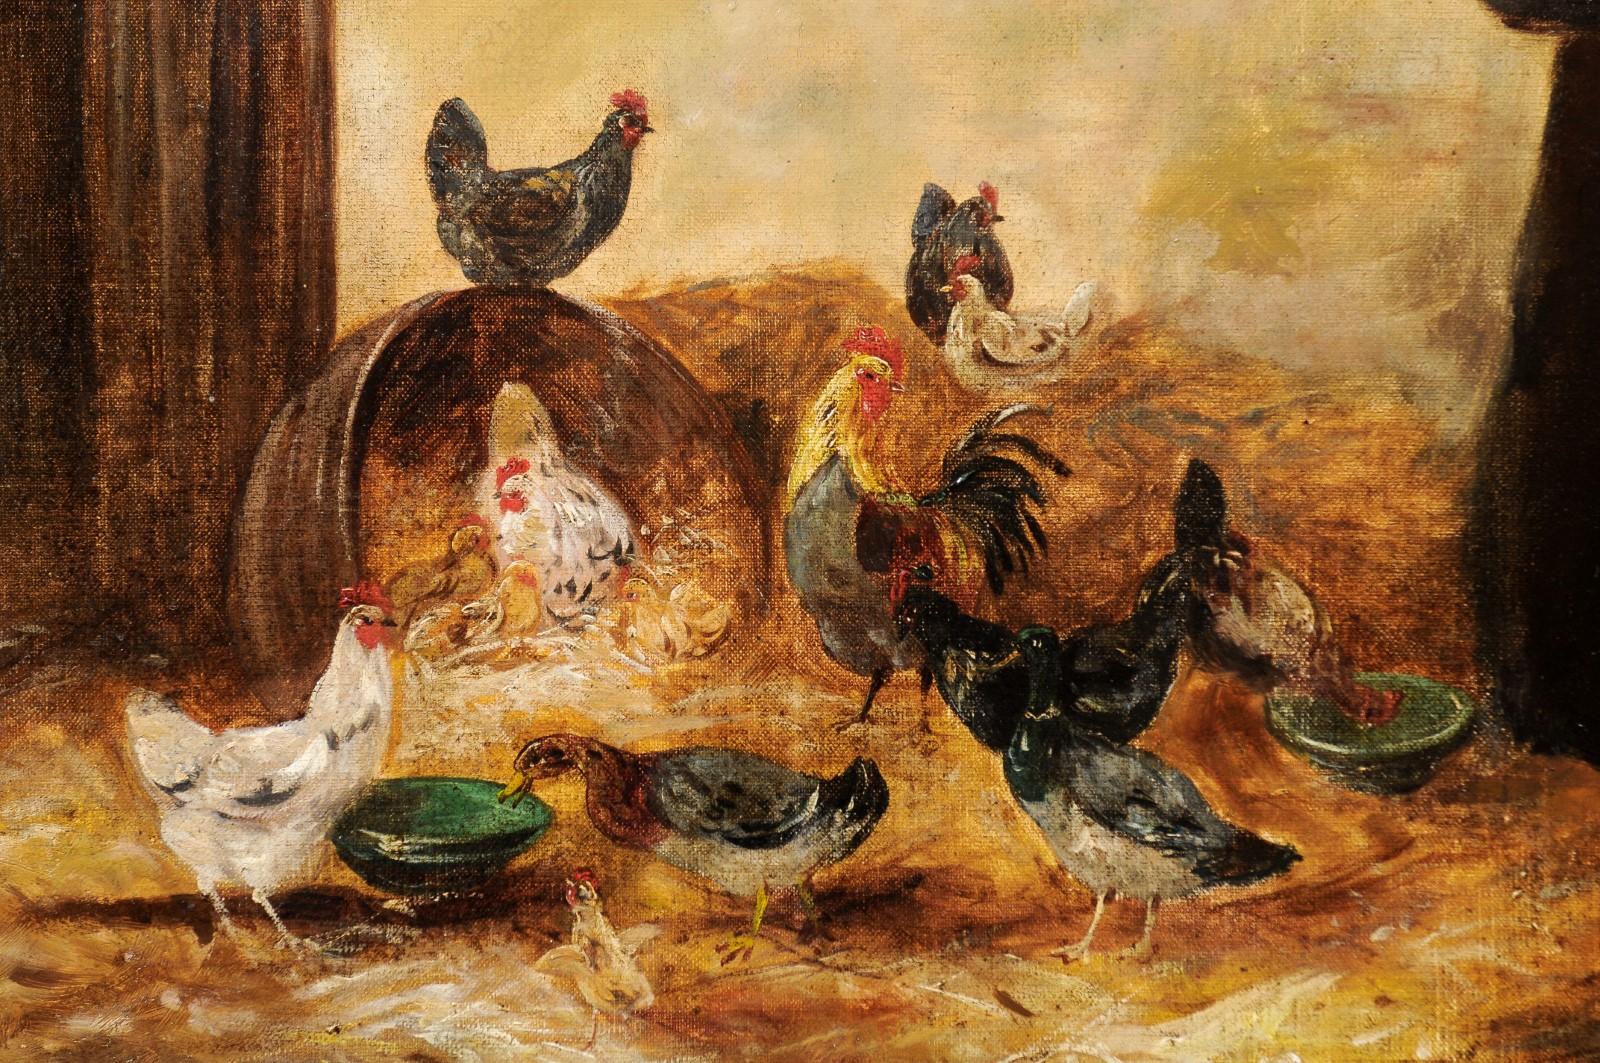 Framed 19th Century Oil on Canvas Barn Painting with Rooster, Hens and Chicks In Good Condition For Sale In Atlanta, GA